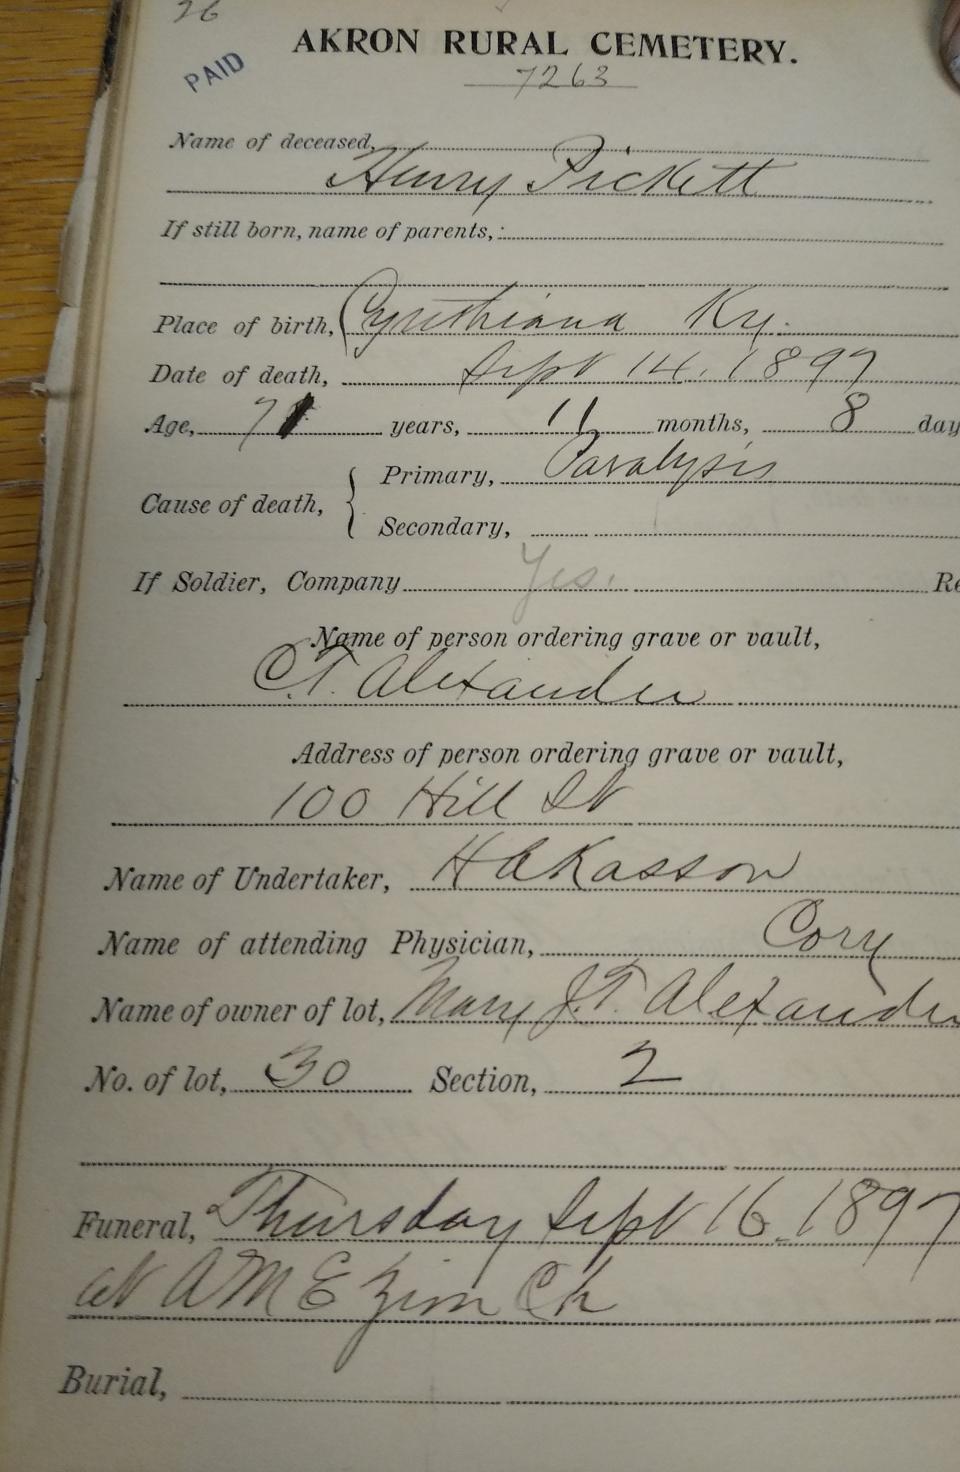 Akron inventor Henry Pickett’s 1897 death is recorded in a book at Glendale Cemetery.